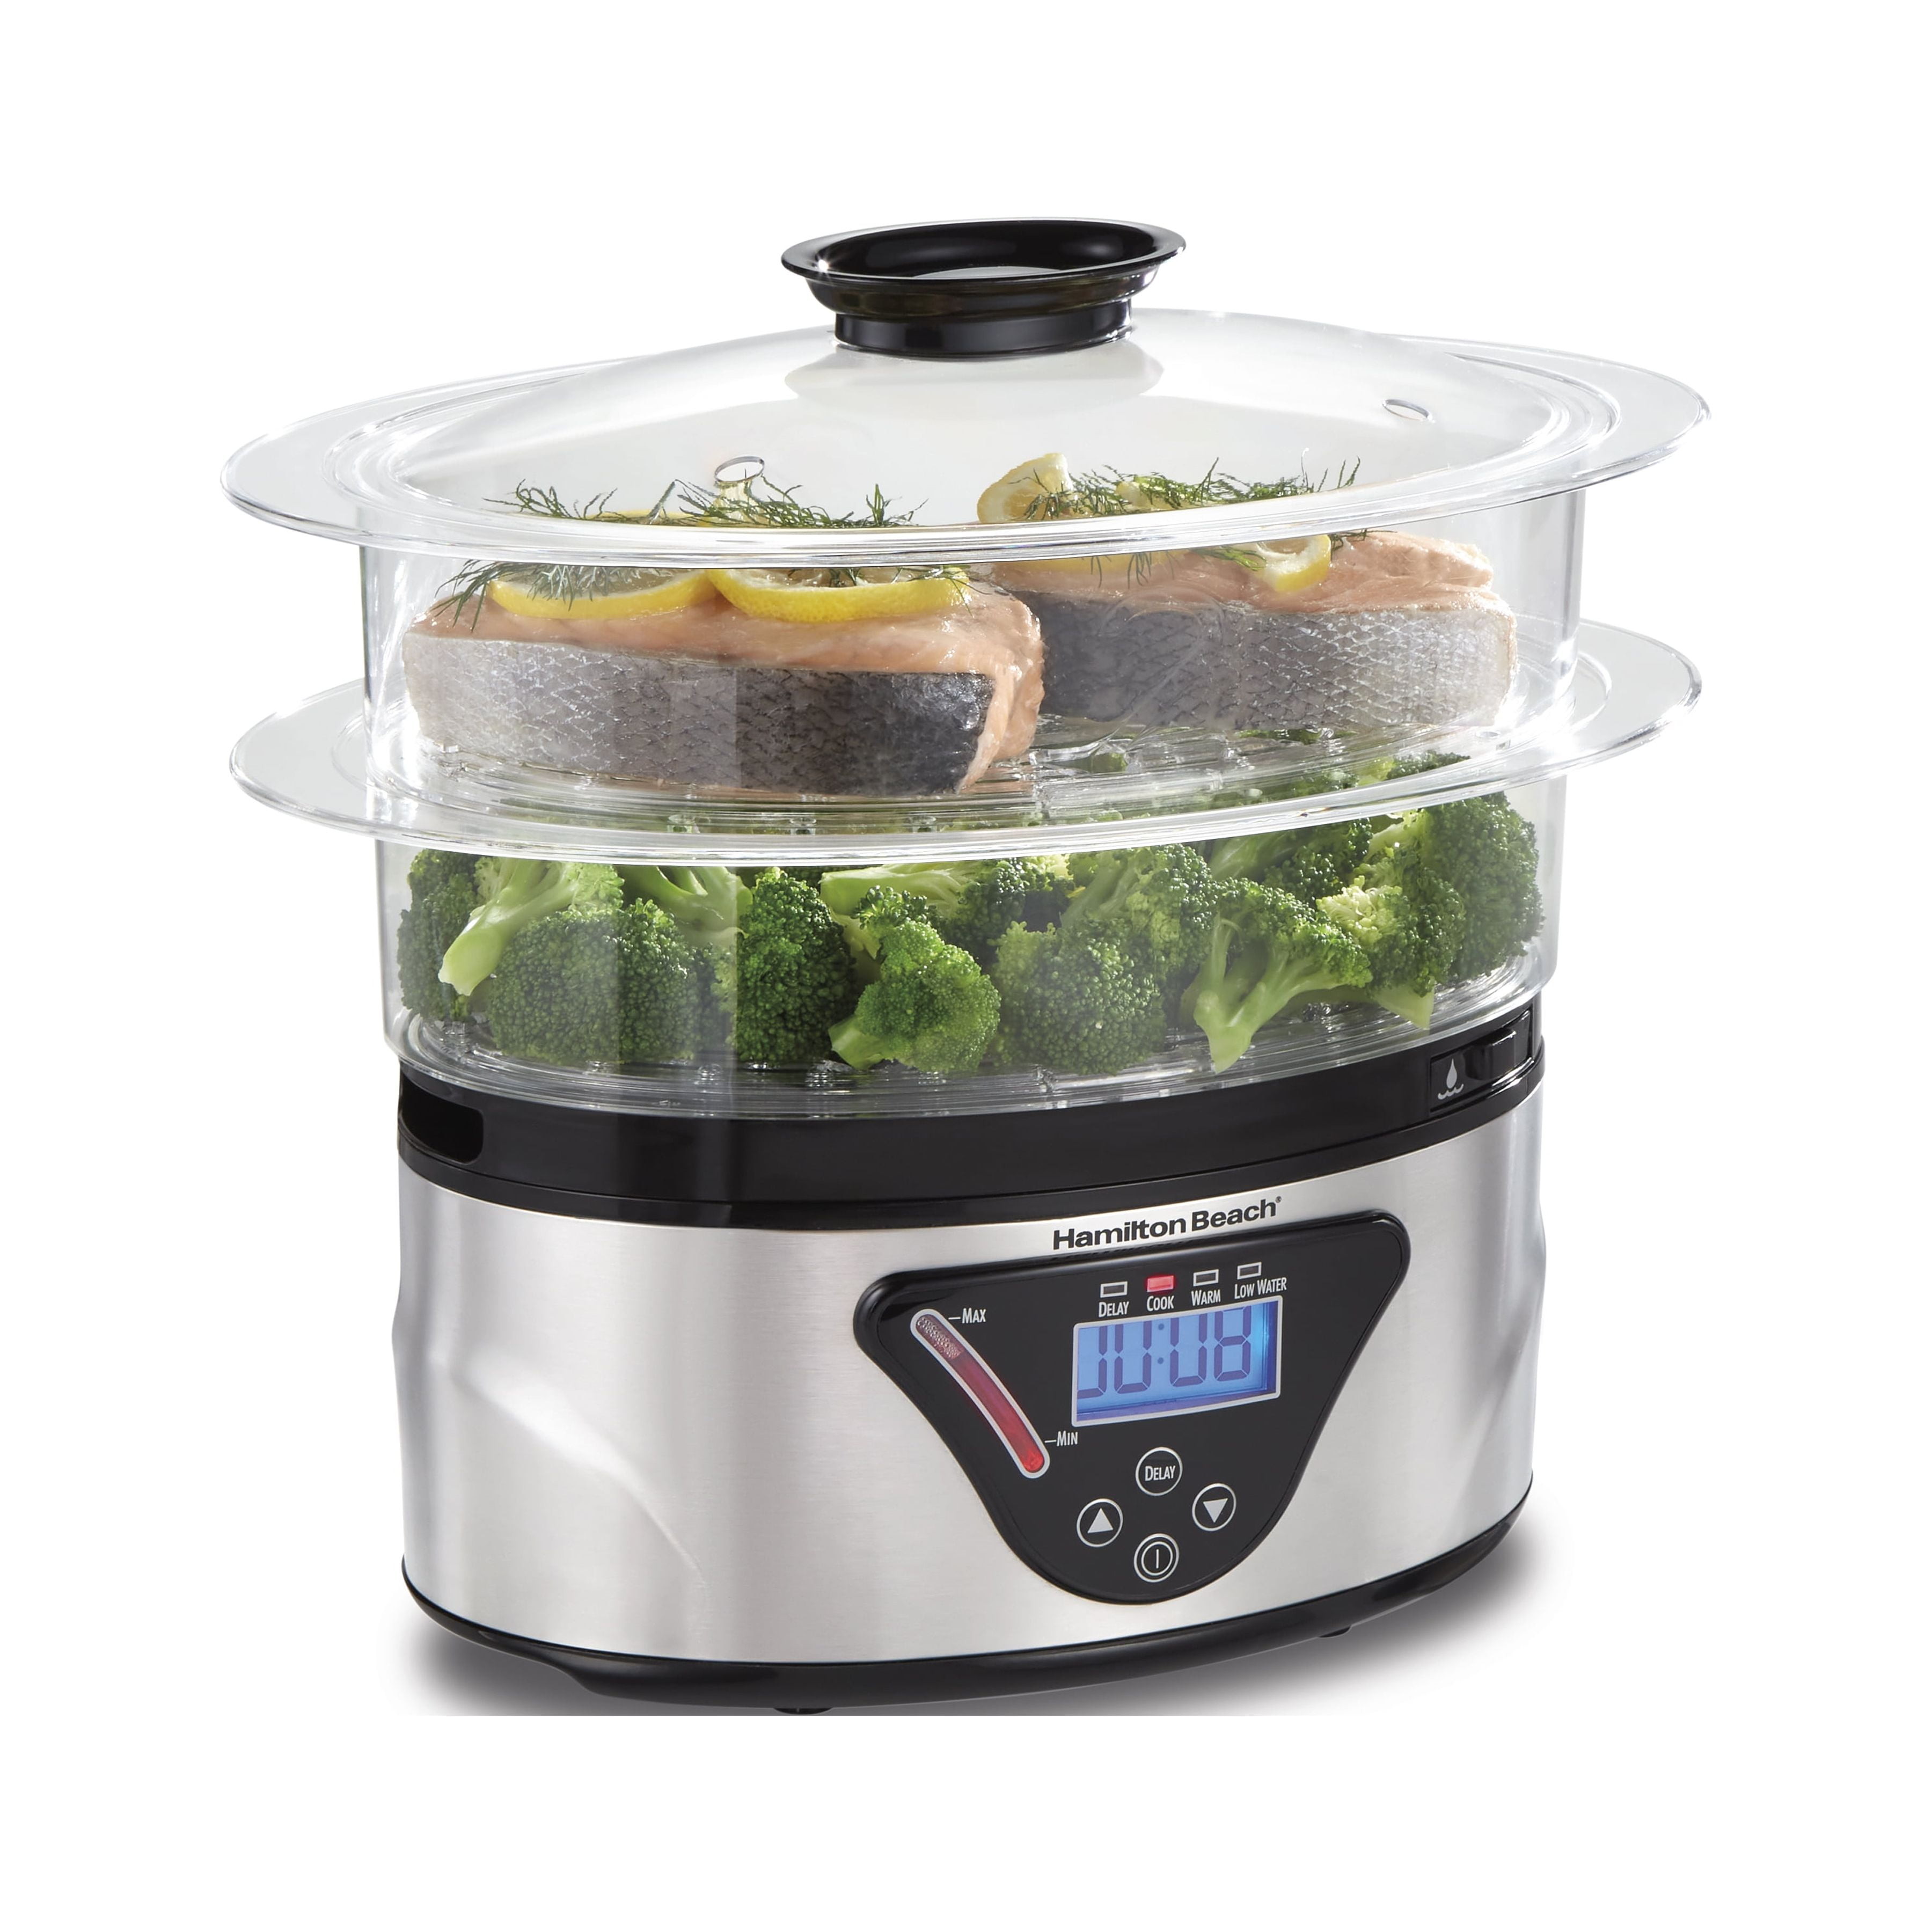 Razorri Electric Food Steamer 5-Quart Stainless Steel with Timer, 24H Delayed Start, Auto Keep Warm, and 68 oz Water Capacity